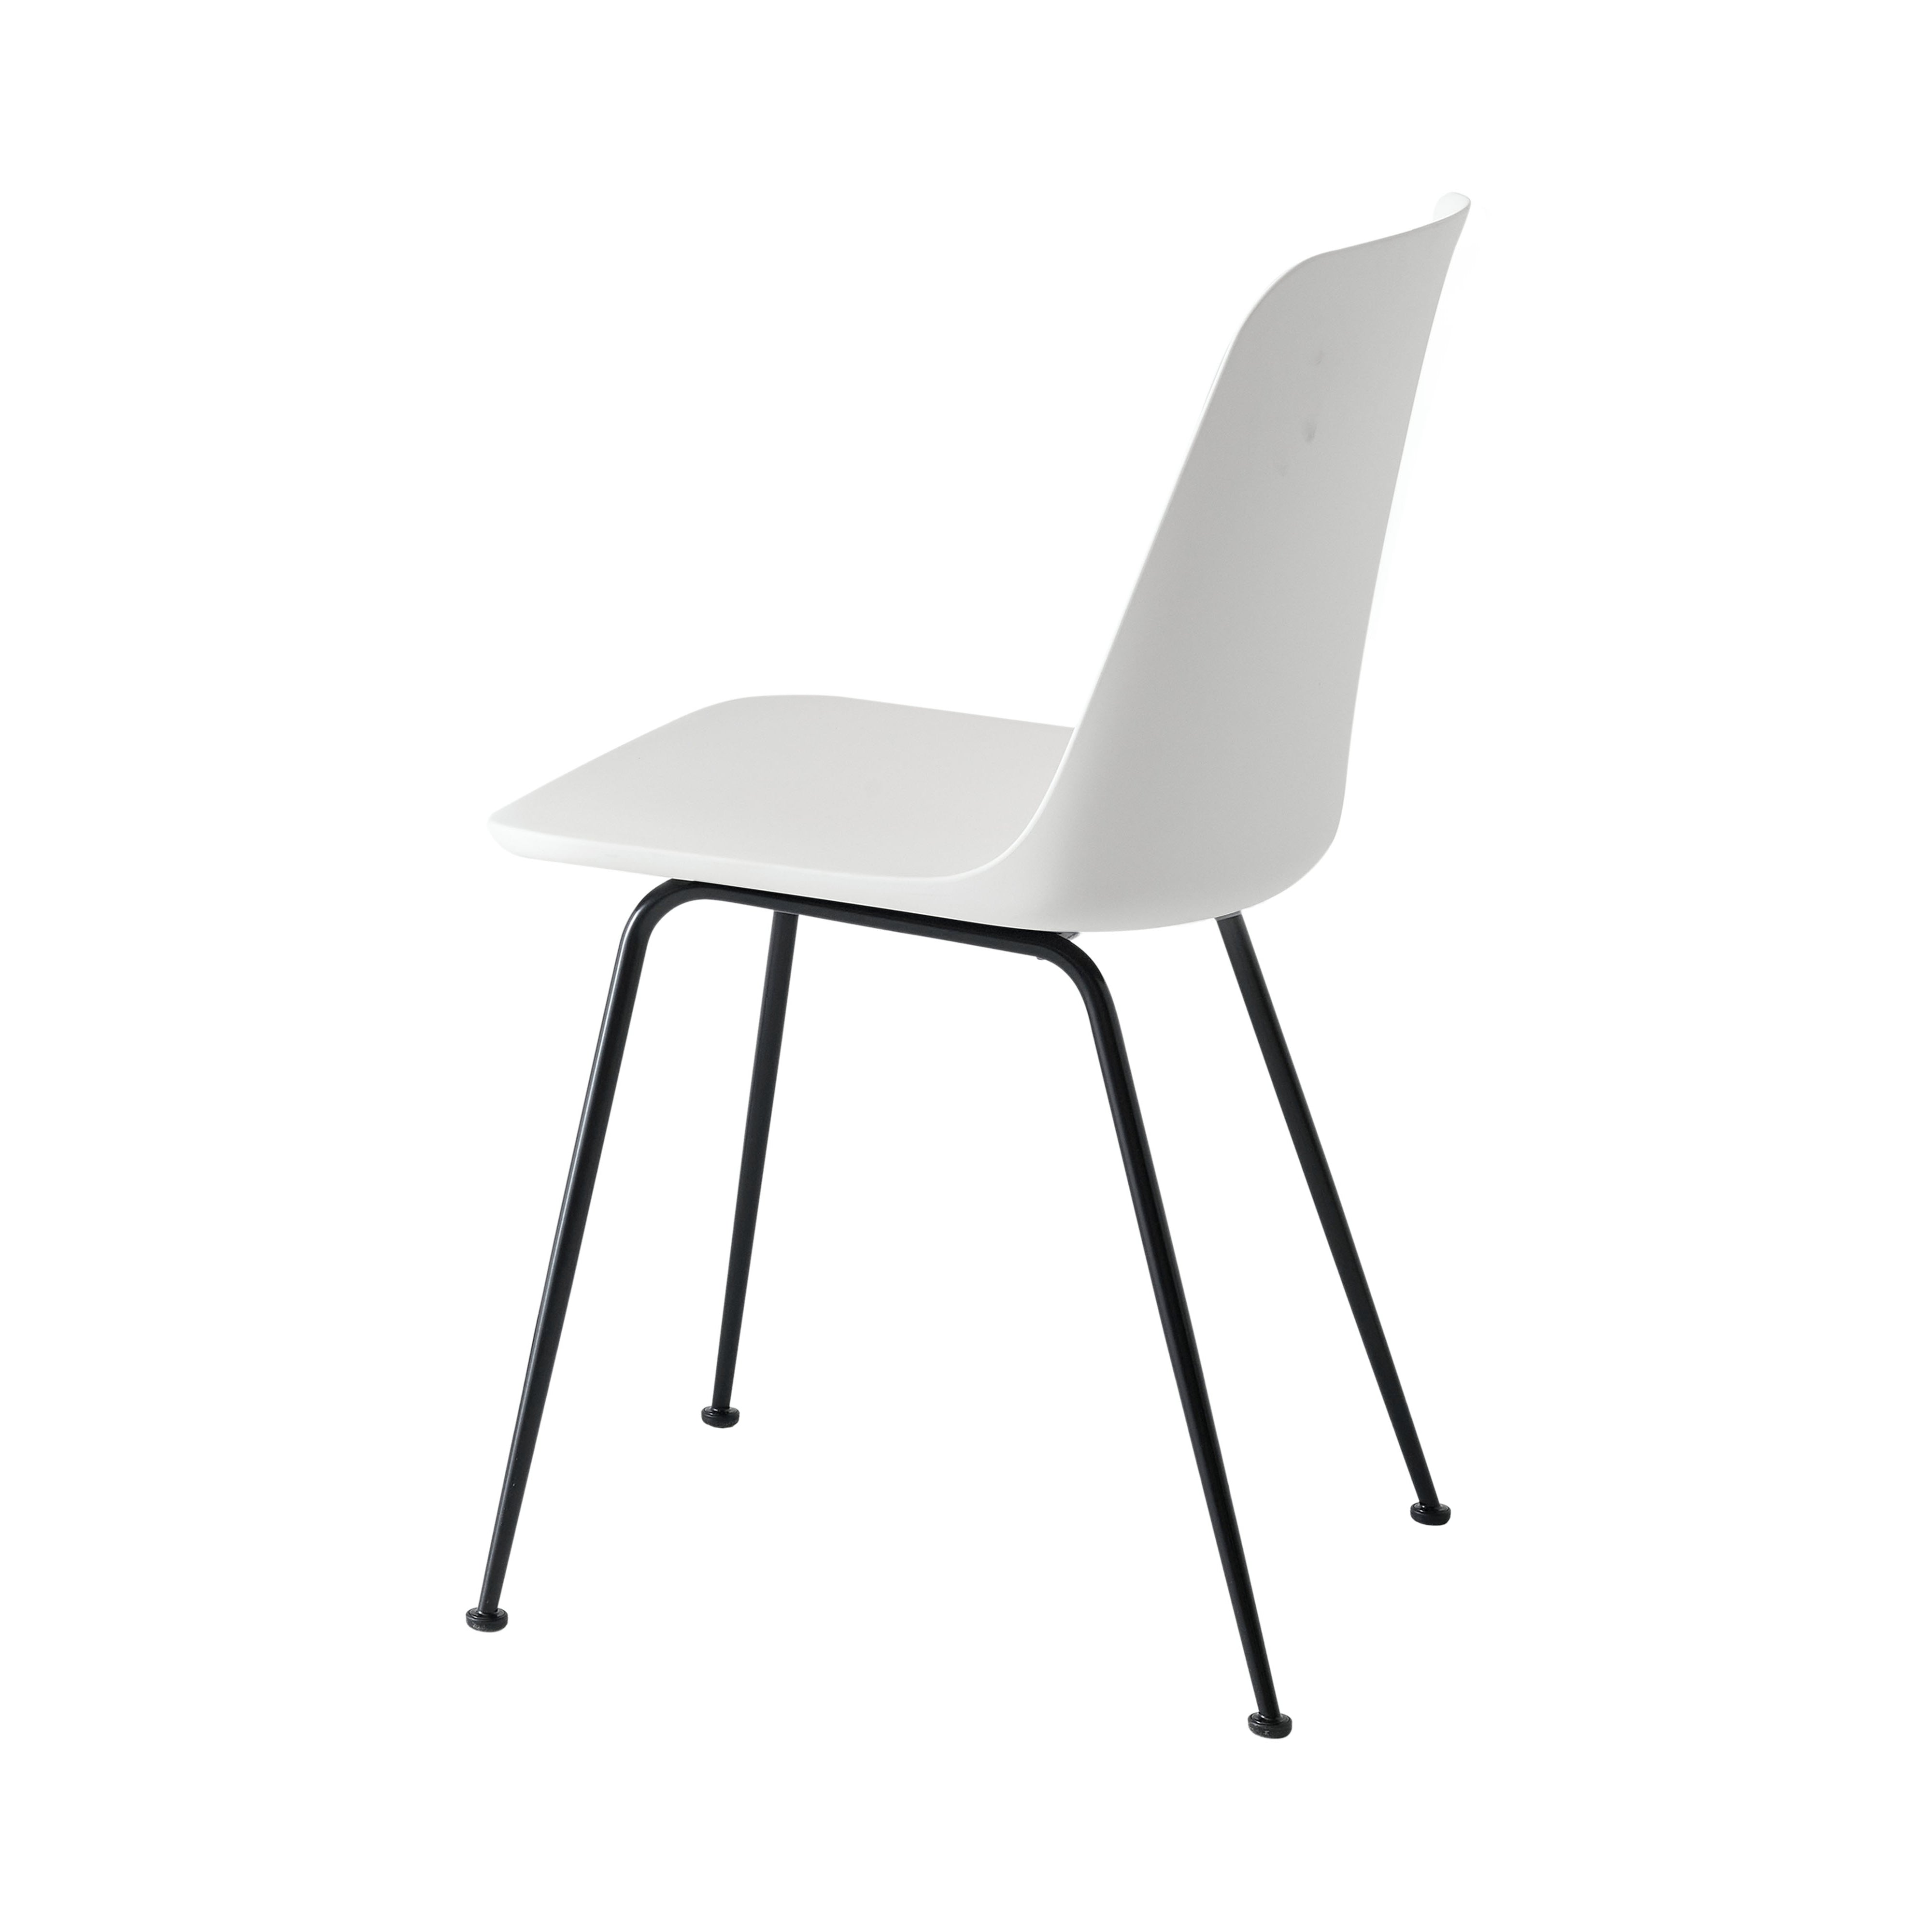 Rely Outdoor Chair HW70: White